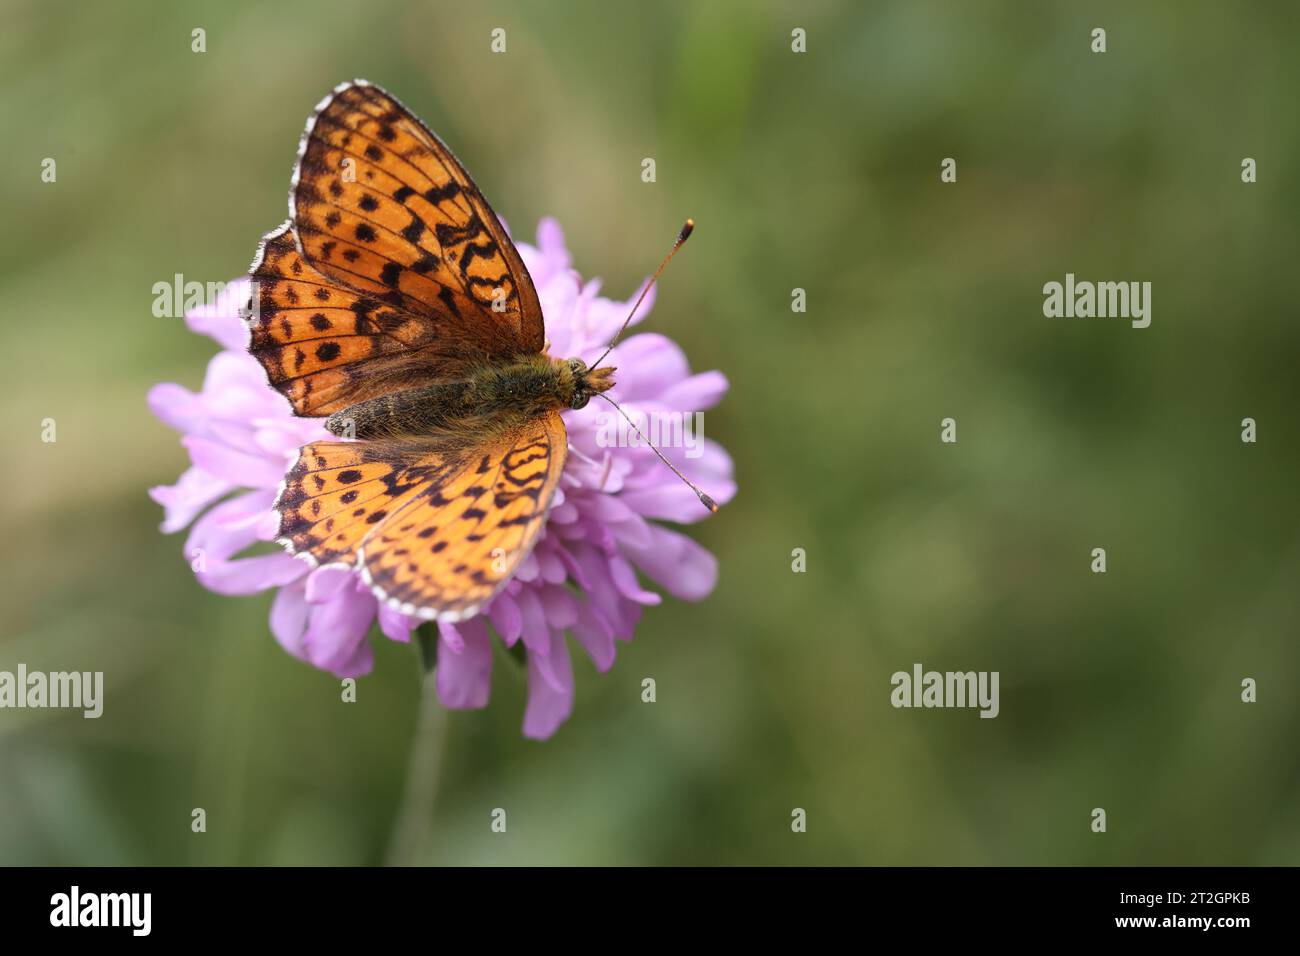 cranberry fritillary butterfly pollinating a purple scabiosa flower Stock Photo